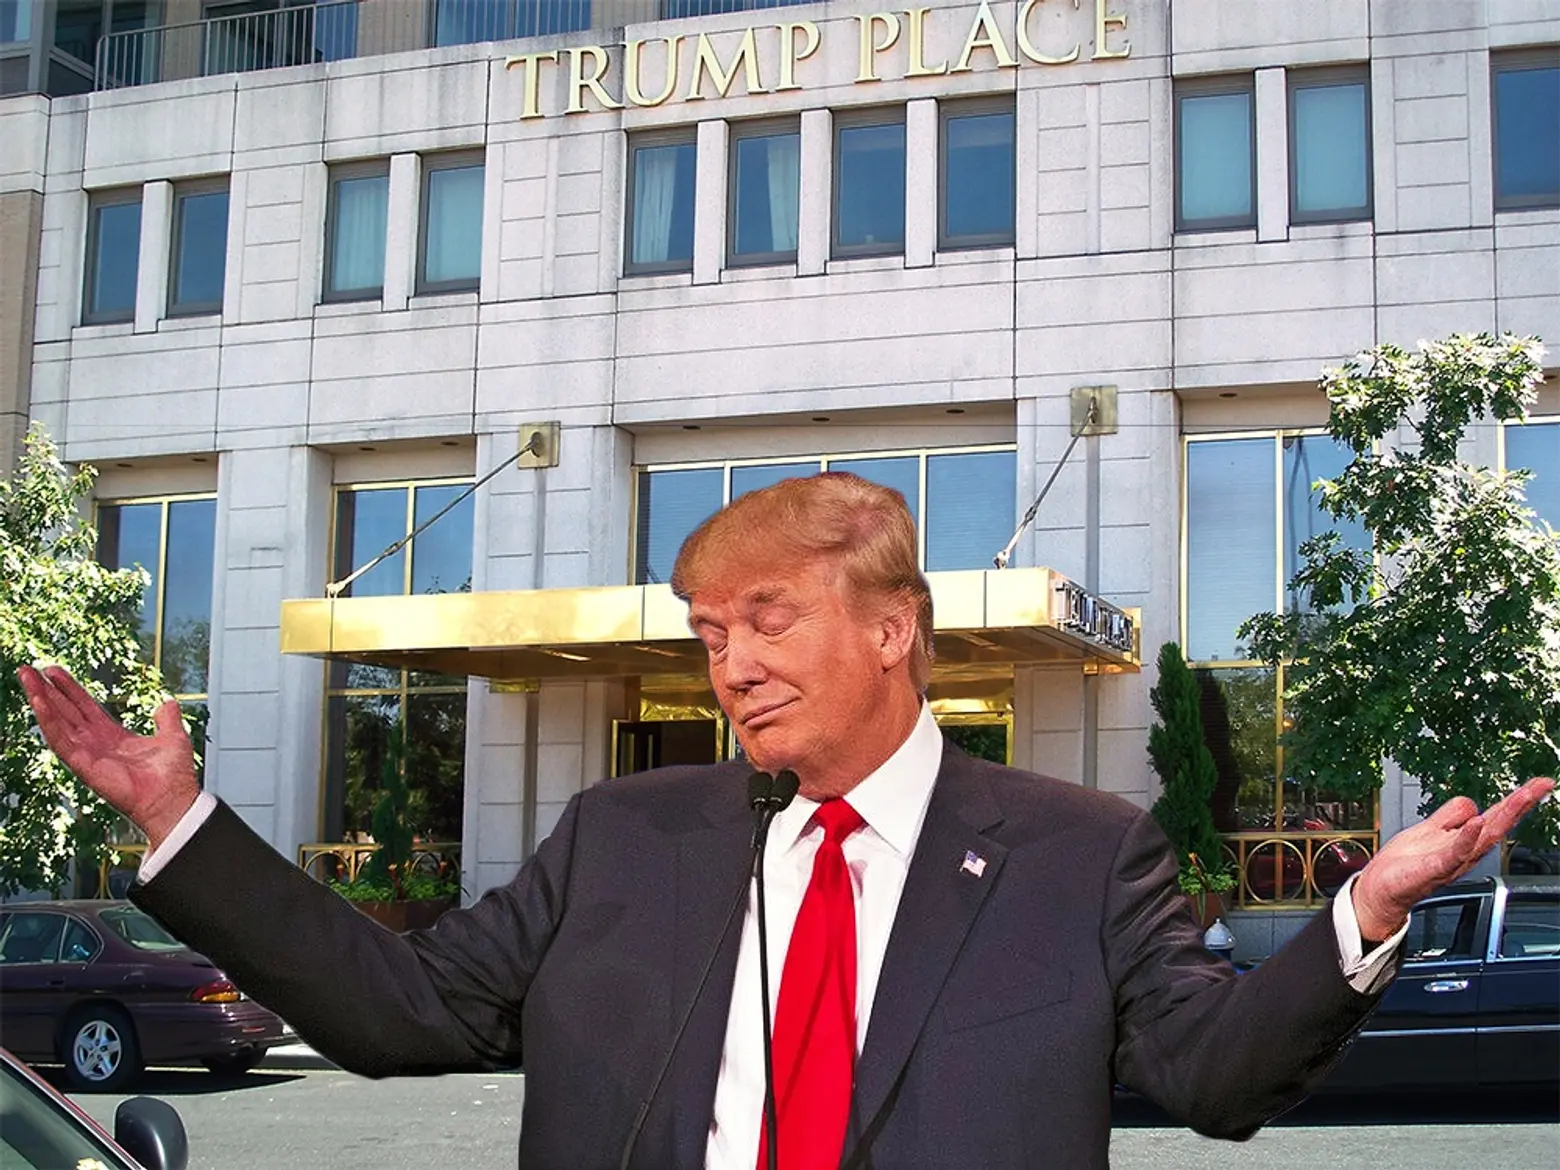 Board shoots down residents’ petition to rename Trump Place